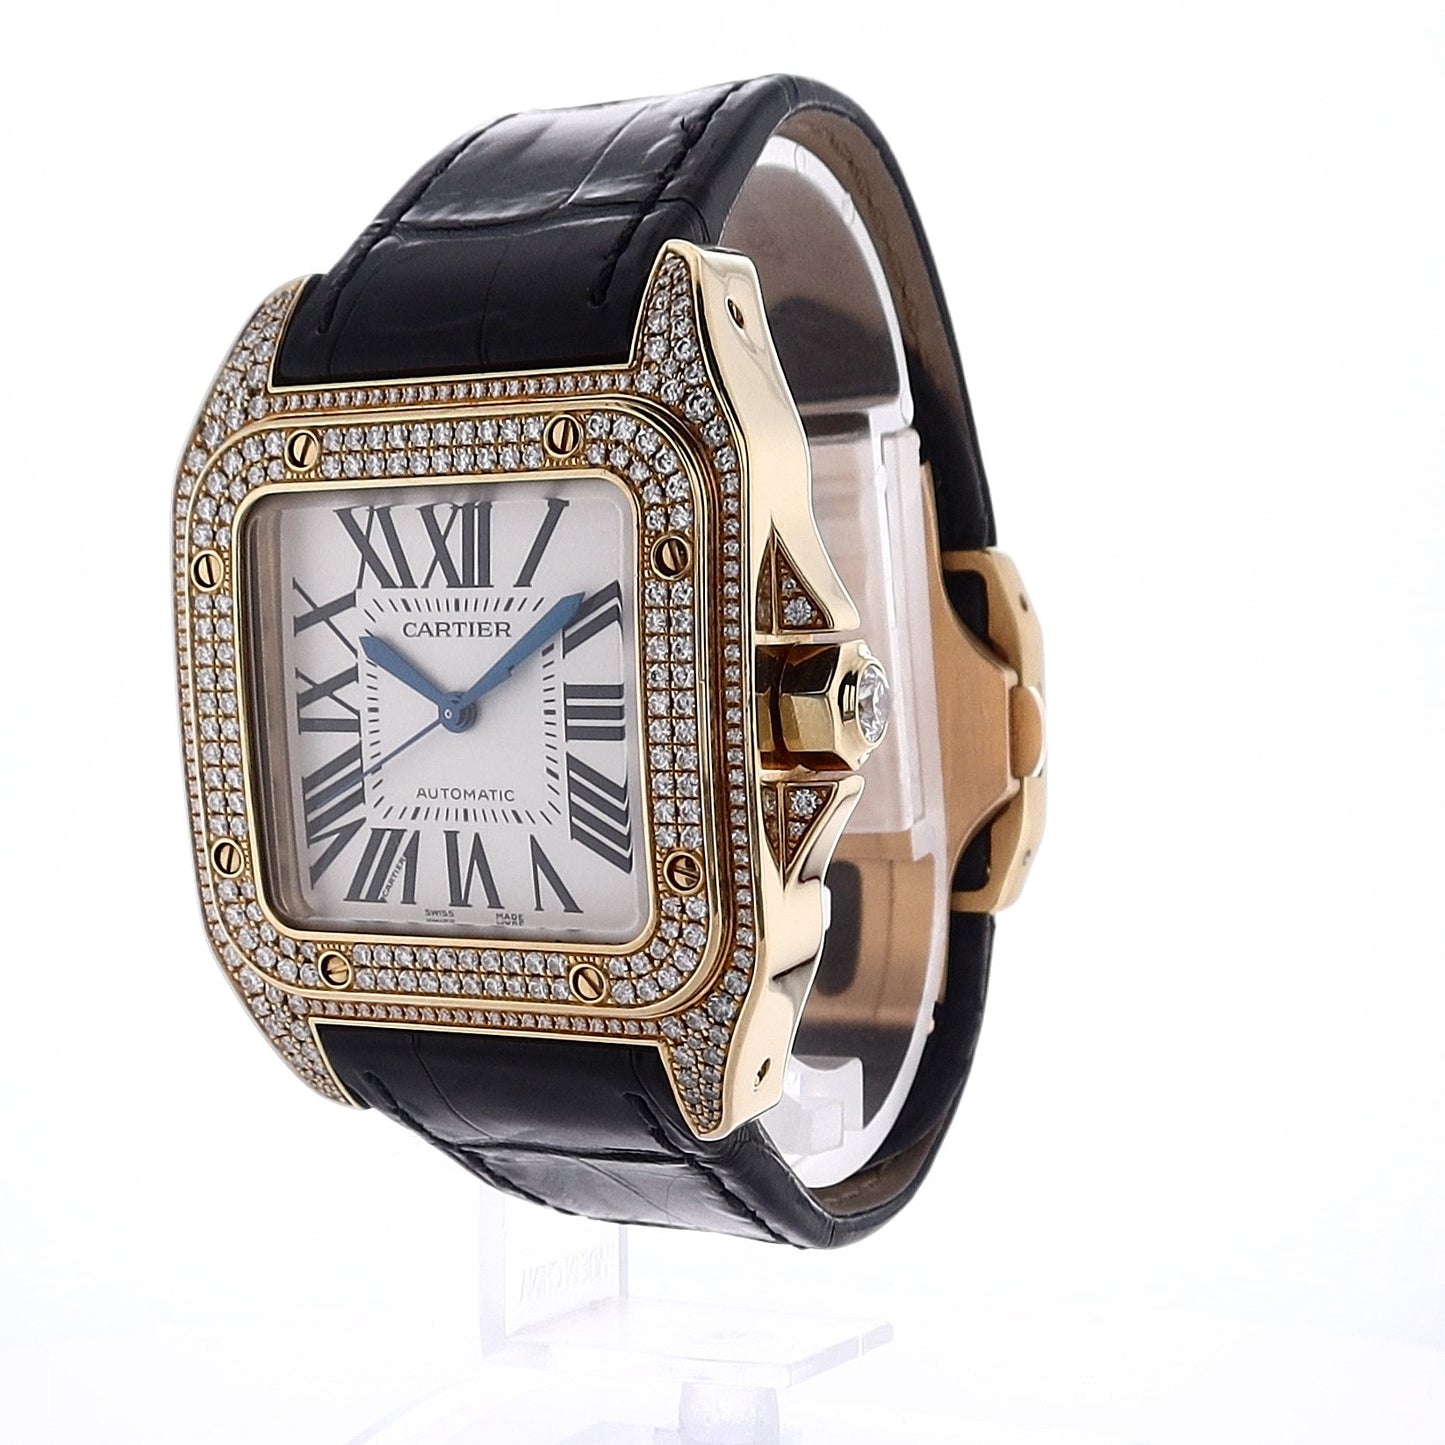 Estate Cartier Santos 100 with Silver Tone Dial and Diamond Case in 18k Yellow Gold